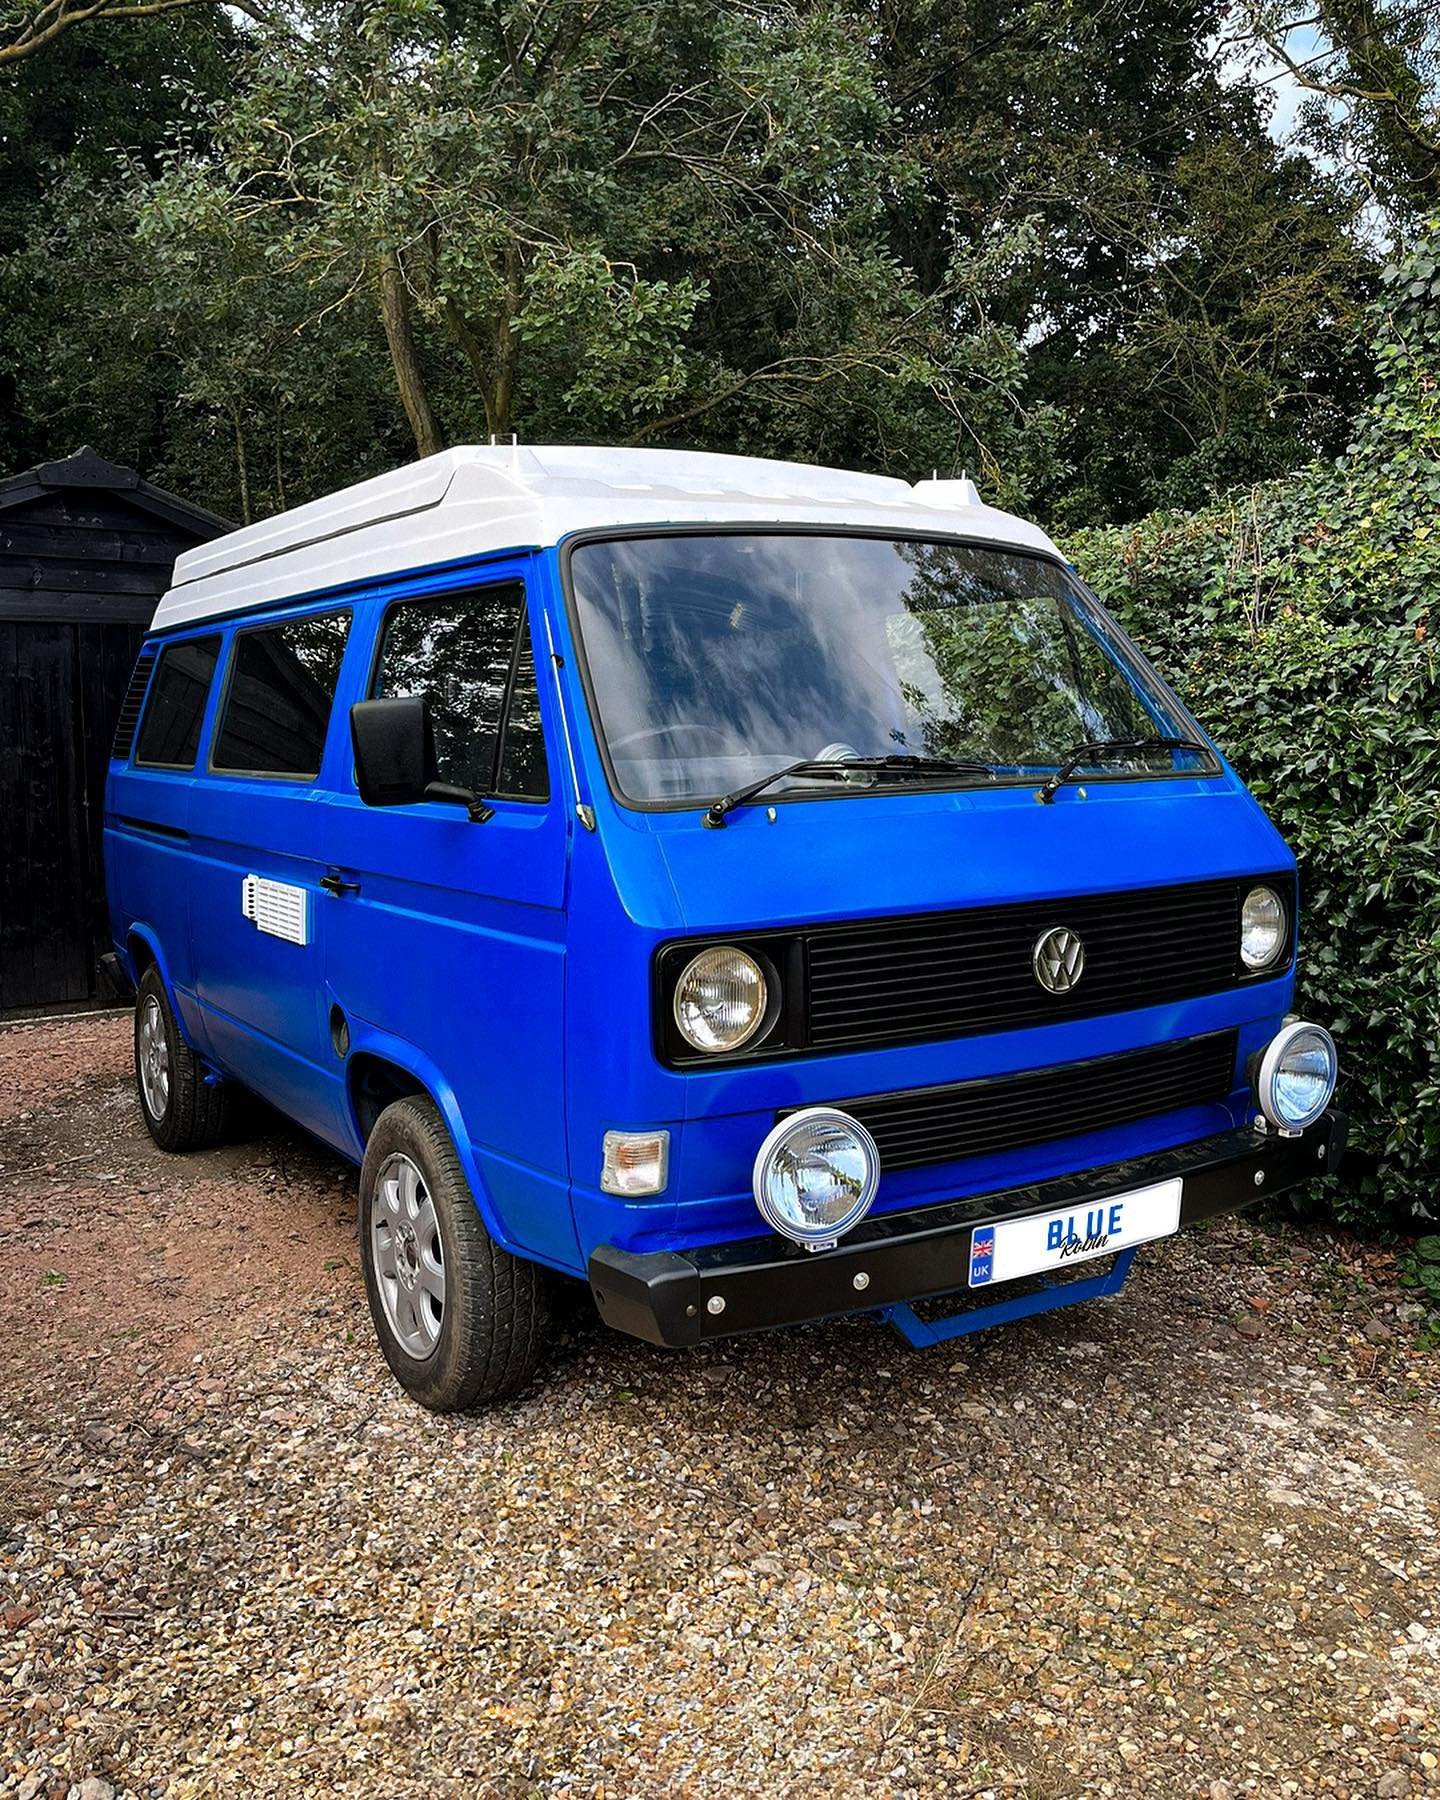 It has been a while since my last update but very happy to share now that the Van has now been back on the road for the last month or so 🥳 very happy with the progress made on it as you can see from the before photo!

Still lots more to do as the in